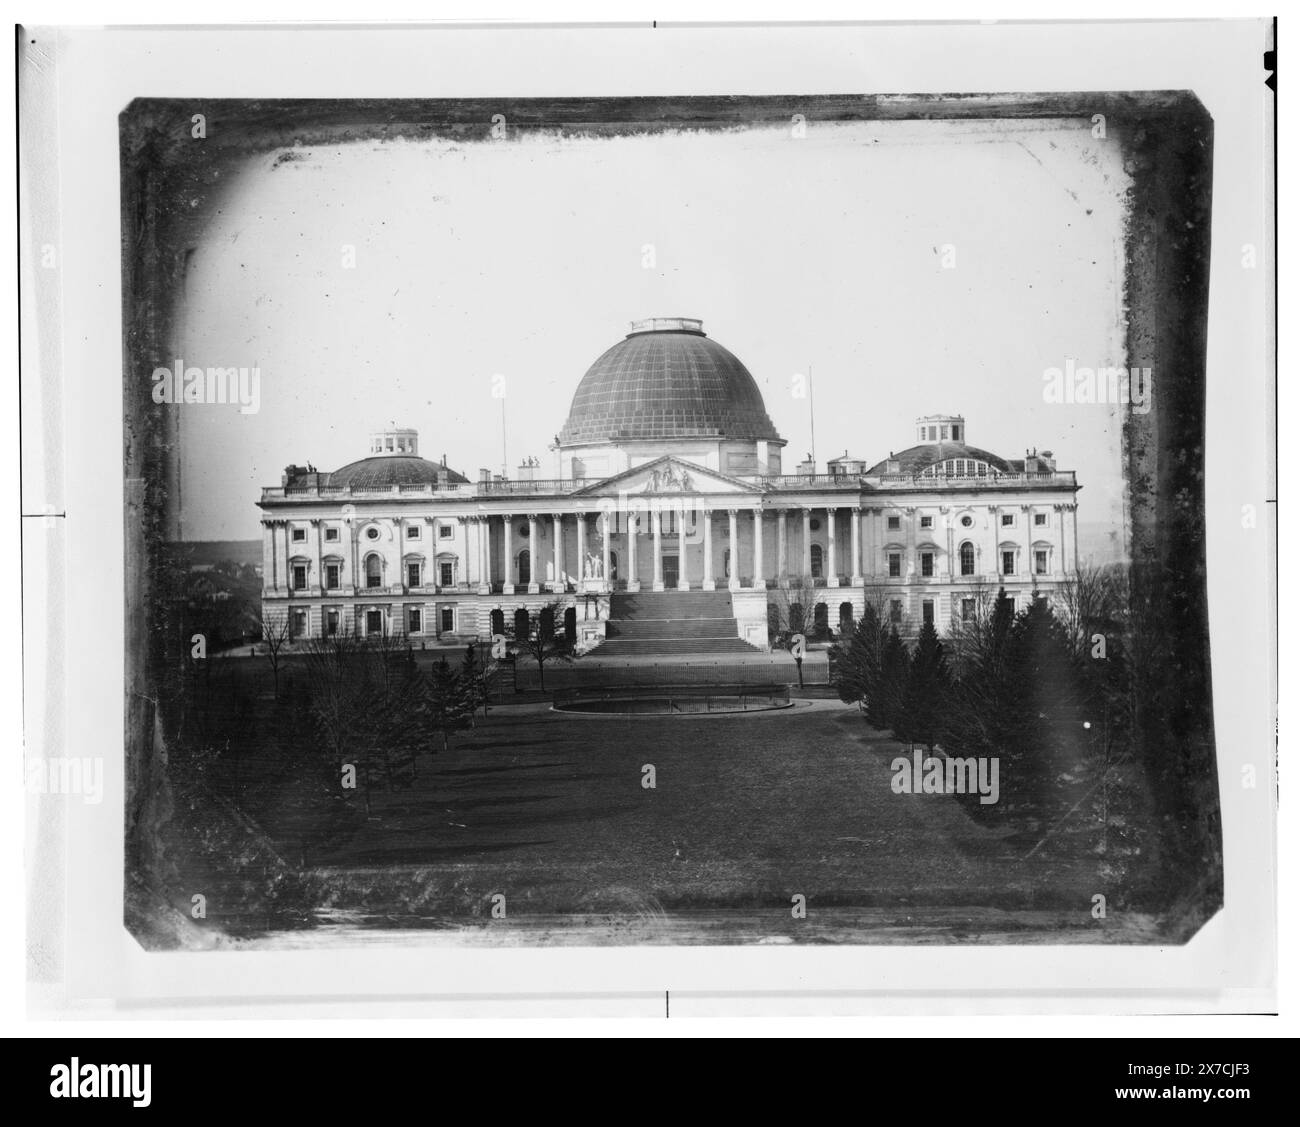 United States Capitol, Washington, D.C., east front elevation, Caption label from exhibit 'American Treasures Imagination': Early Views of Washington. Several government buildings were among the first edifices in the nation's capital to be recorded by the relatively new medium of photography. John Plumbe, Jr., the first professional photographer in Washington, D.C., operated a studio in the mid-1840s. Plumbe's image of the Capitol, with its former copper-sheathed wooden dome, is the earliest surviving photograph of the building., Title devised by Library staff., Purchase; 1972; (DLC/PP-1972:R0 Stock Photo